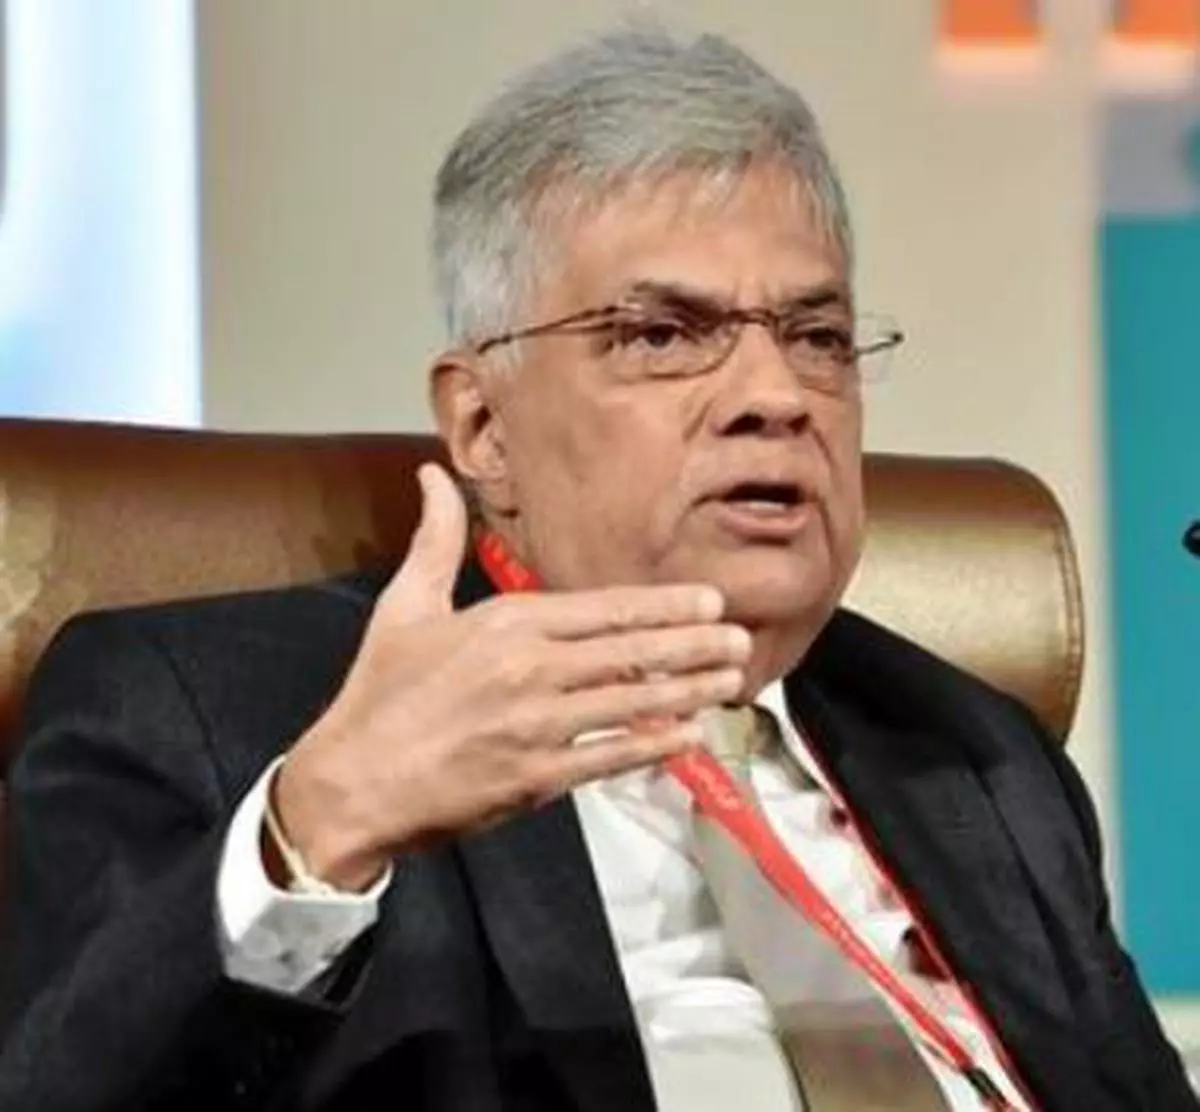 President Ranil Wickremesinghe has promised to limit the powers of the presidency and strengthen Parliament in response to the protesters’ demands.